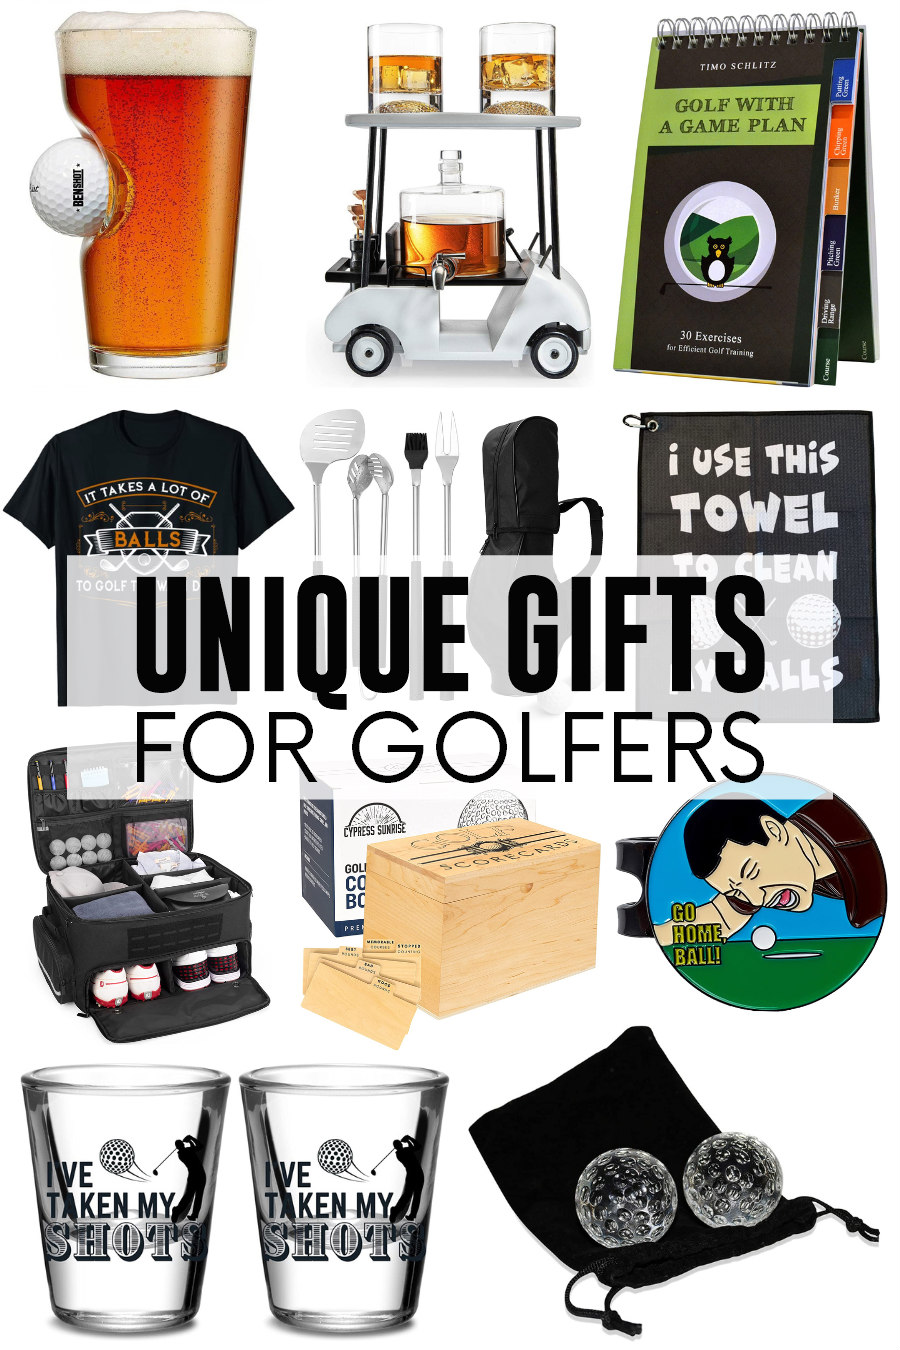 Unique golf gifts from Amazon for golfers.